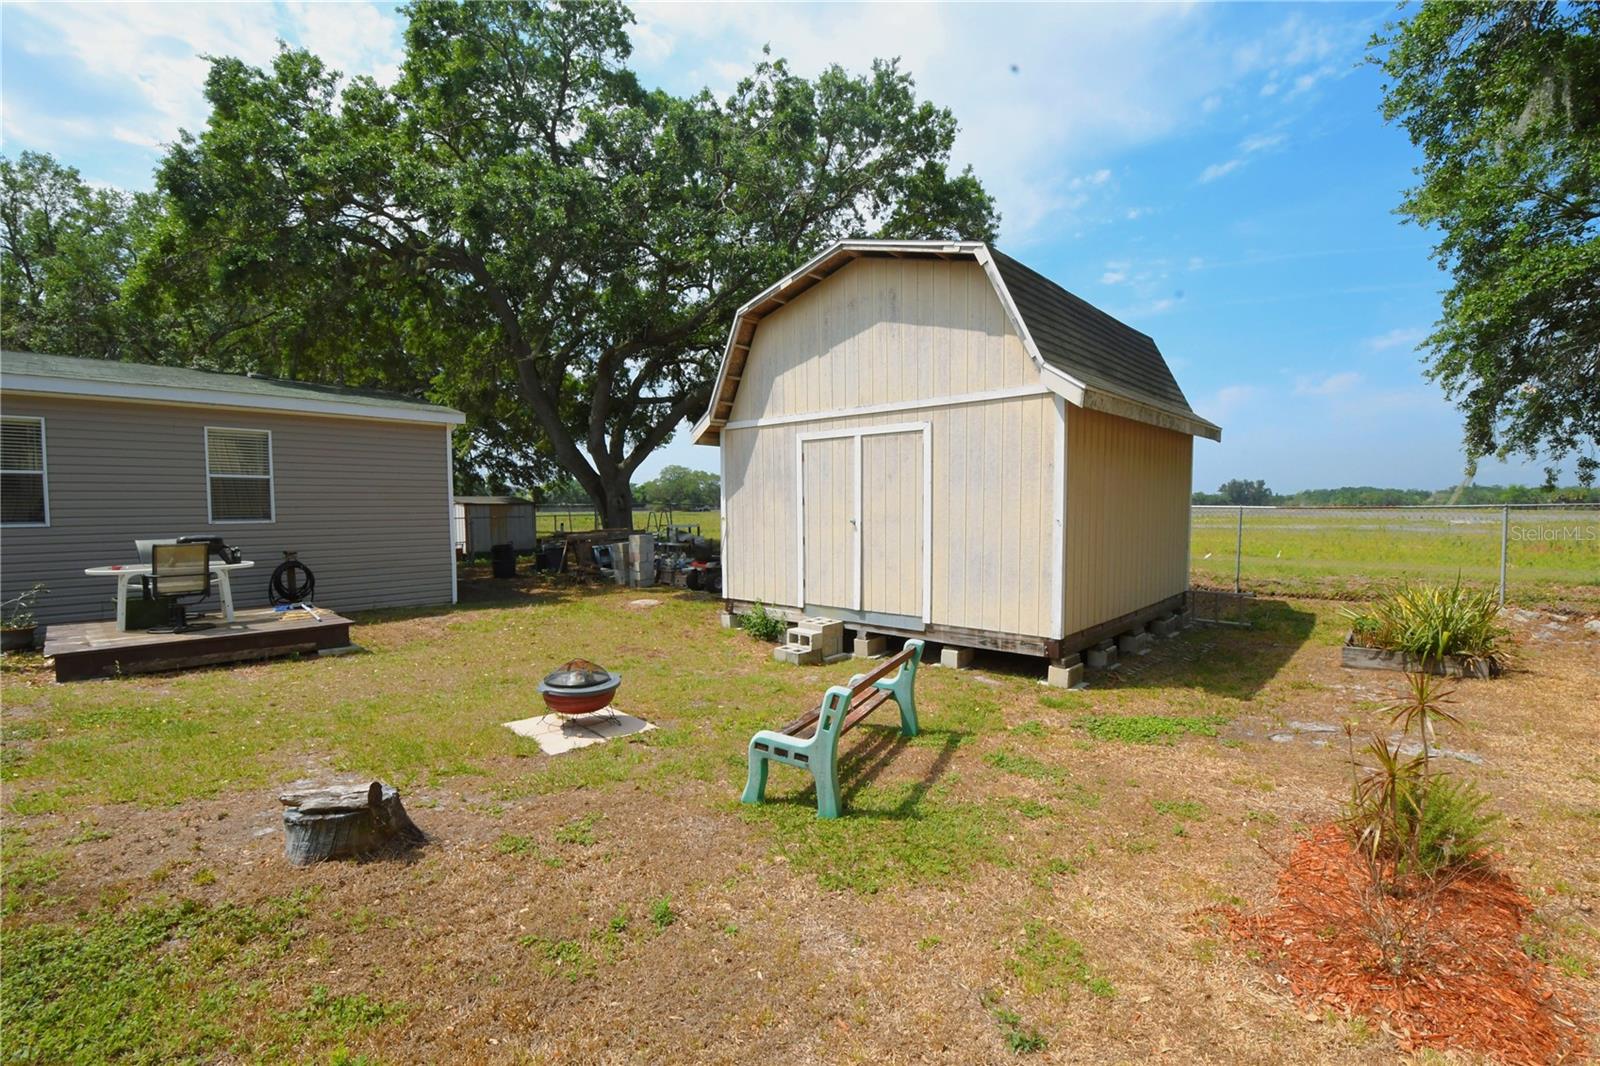 The storage barn is perfect to house all of your tools and lawn equipment.